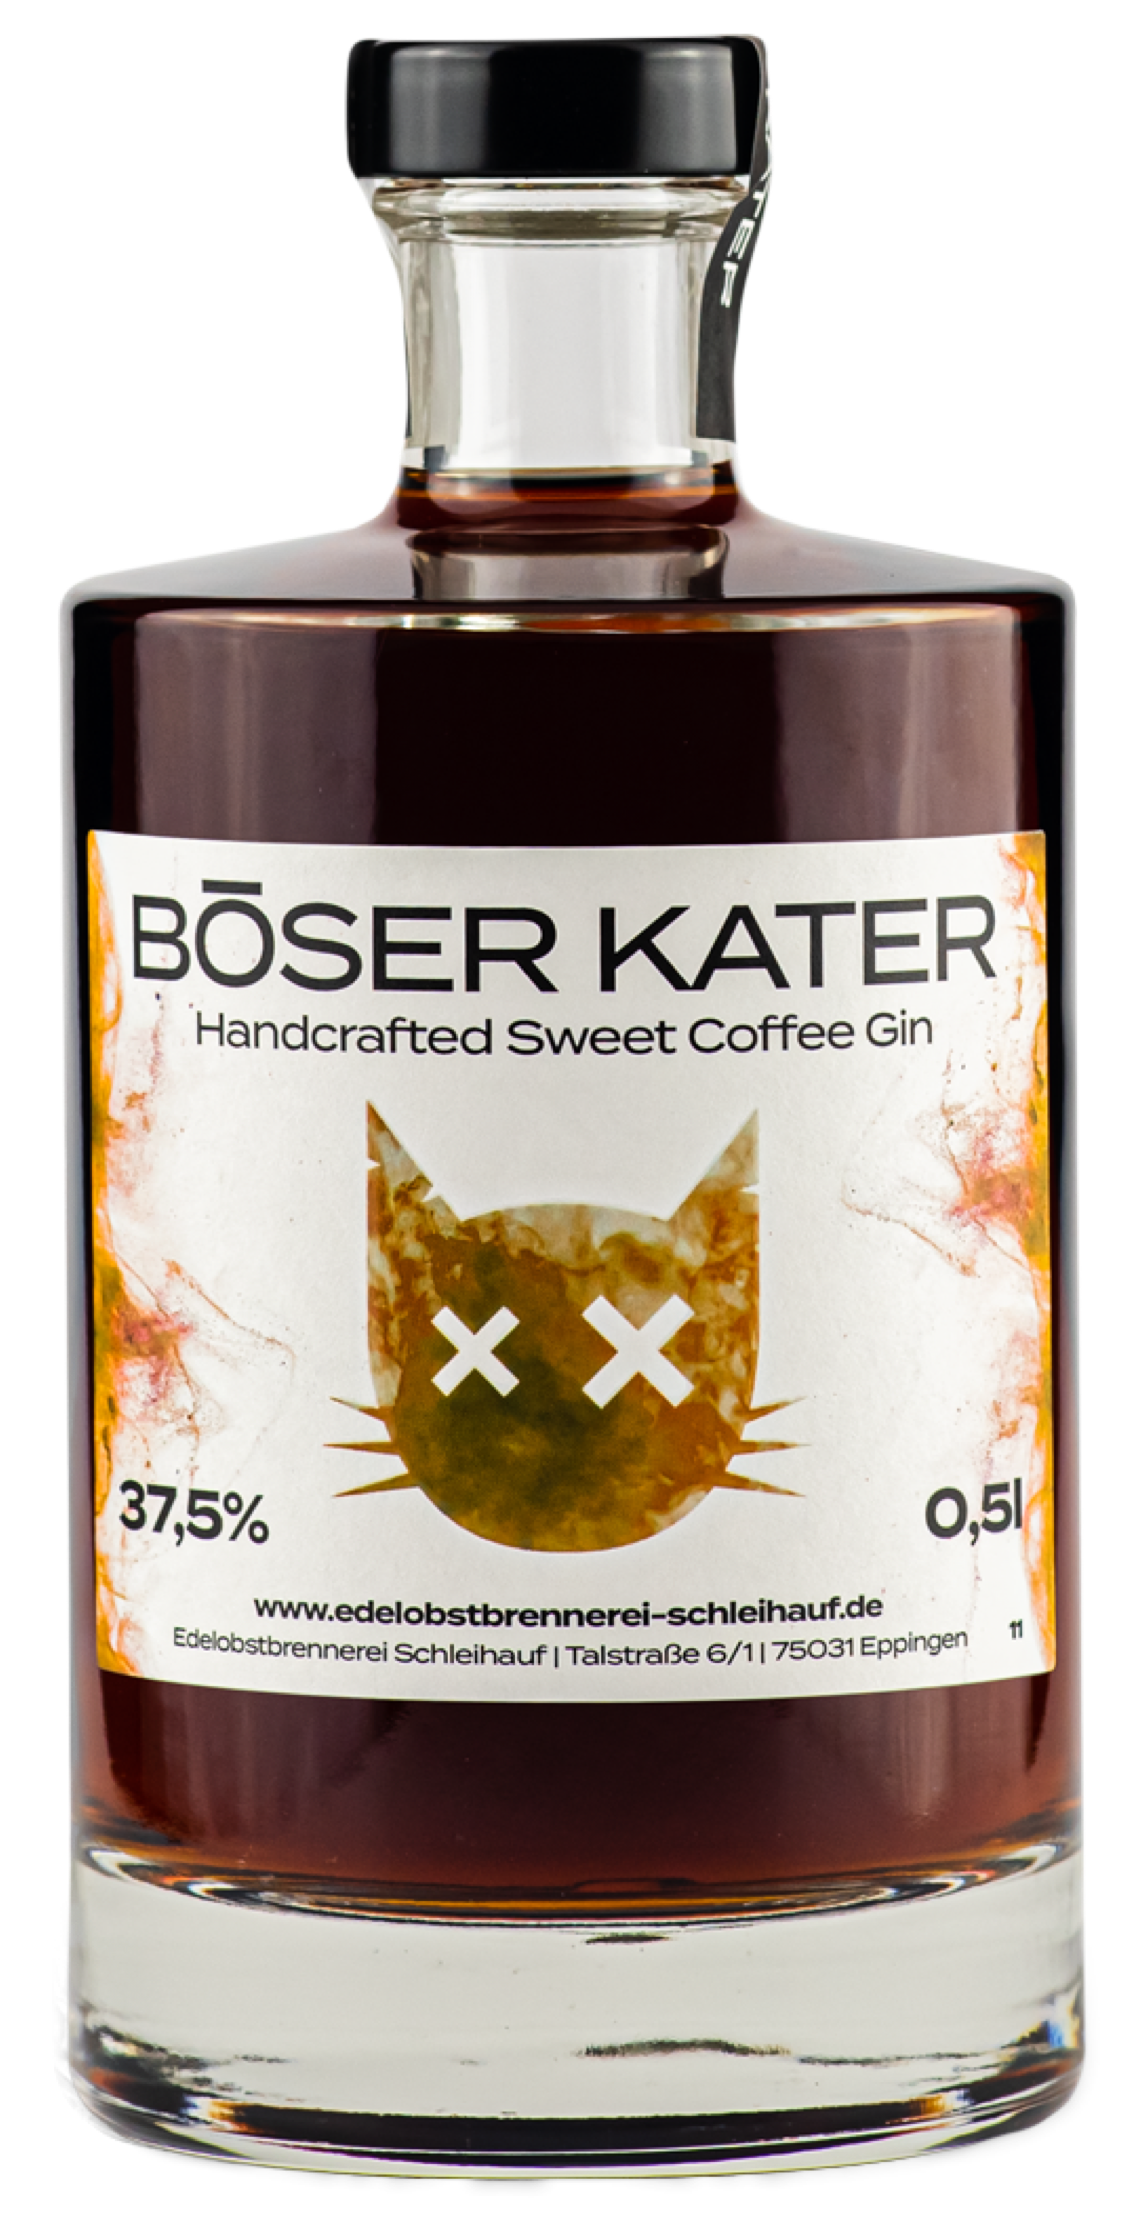 Böser Kater Handcrafted Sweet Coffee Gin 37,5% vol. 0,5l